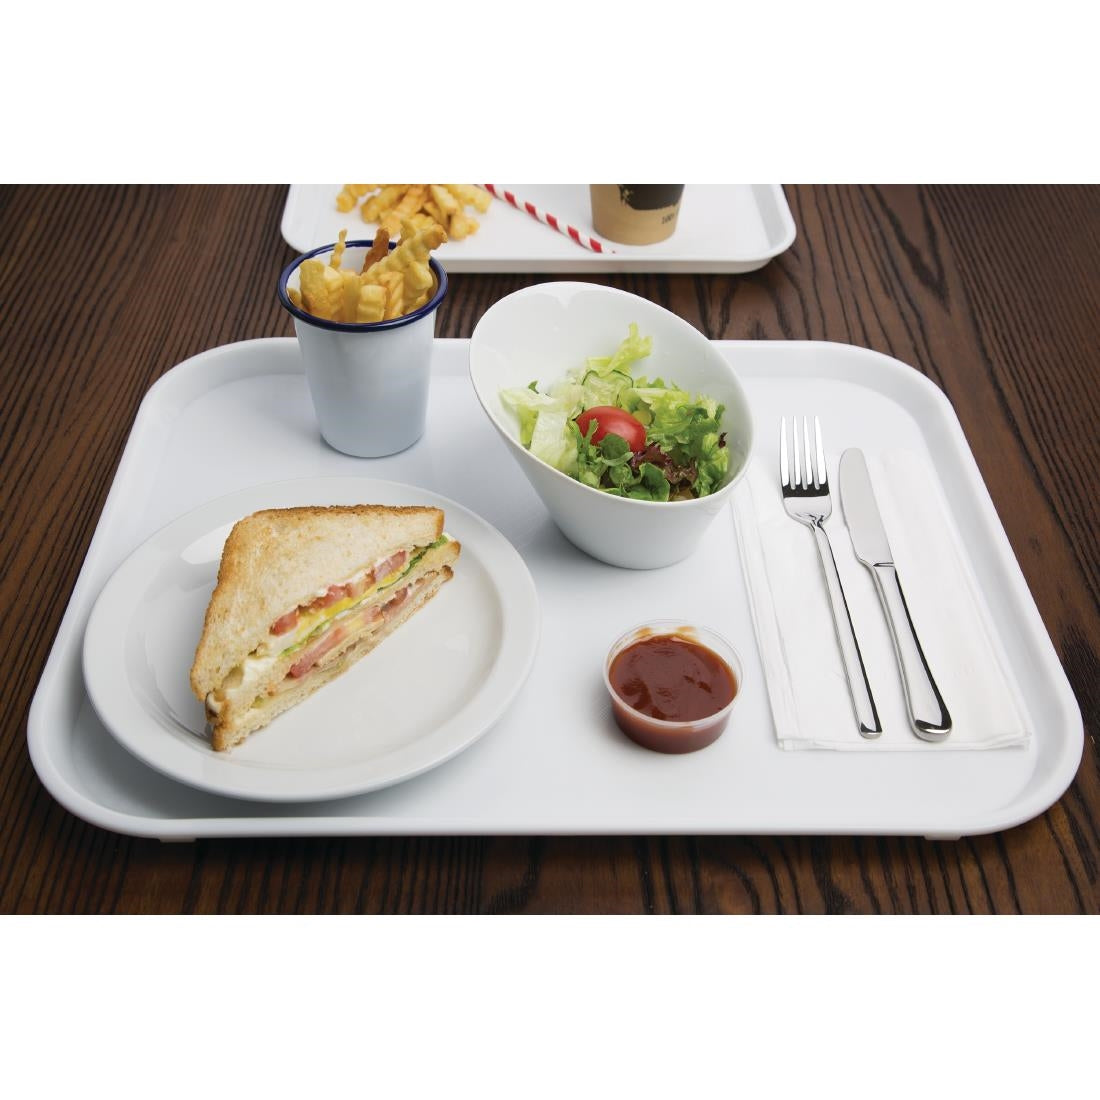 GF997 Kristallon Polypropylene Fast Food Tray White Large 450mm JD Catering Equipment Solutions Ltd